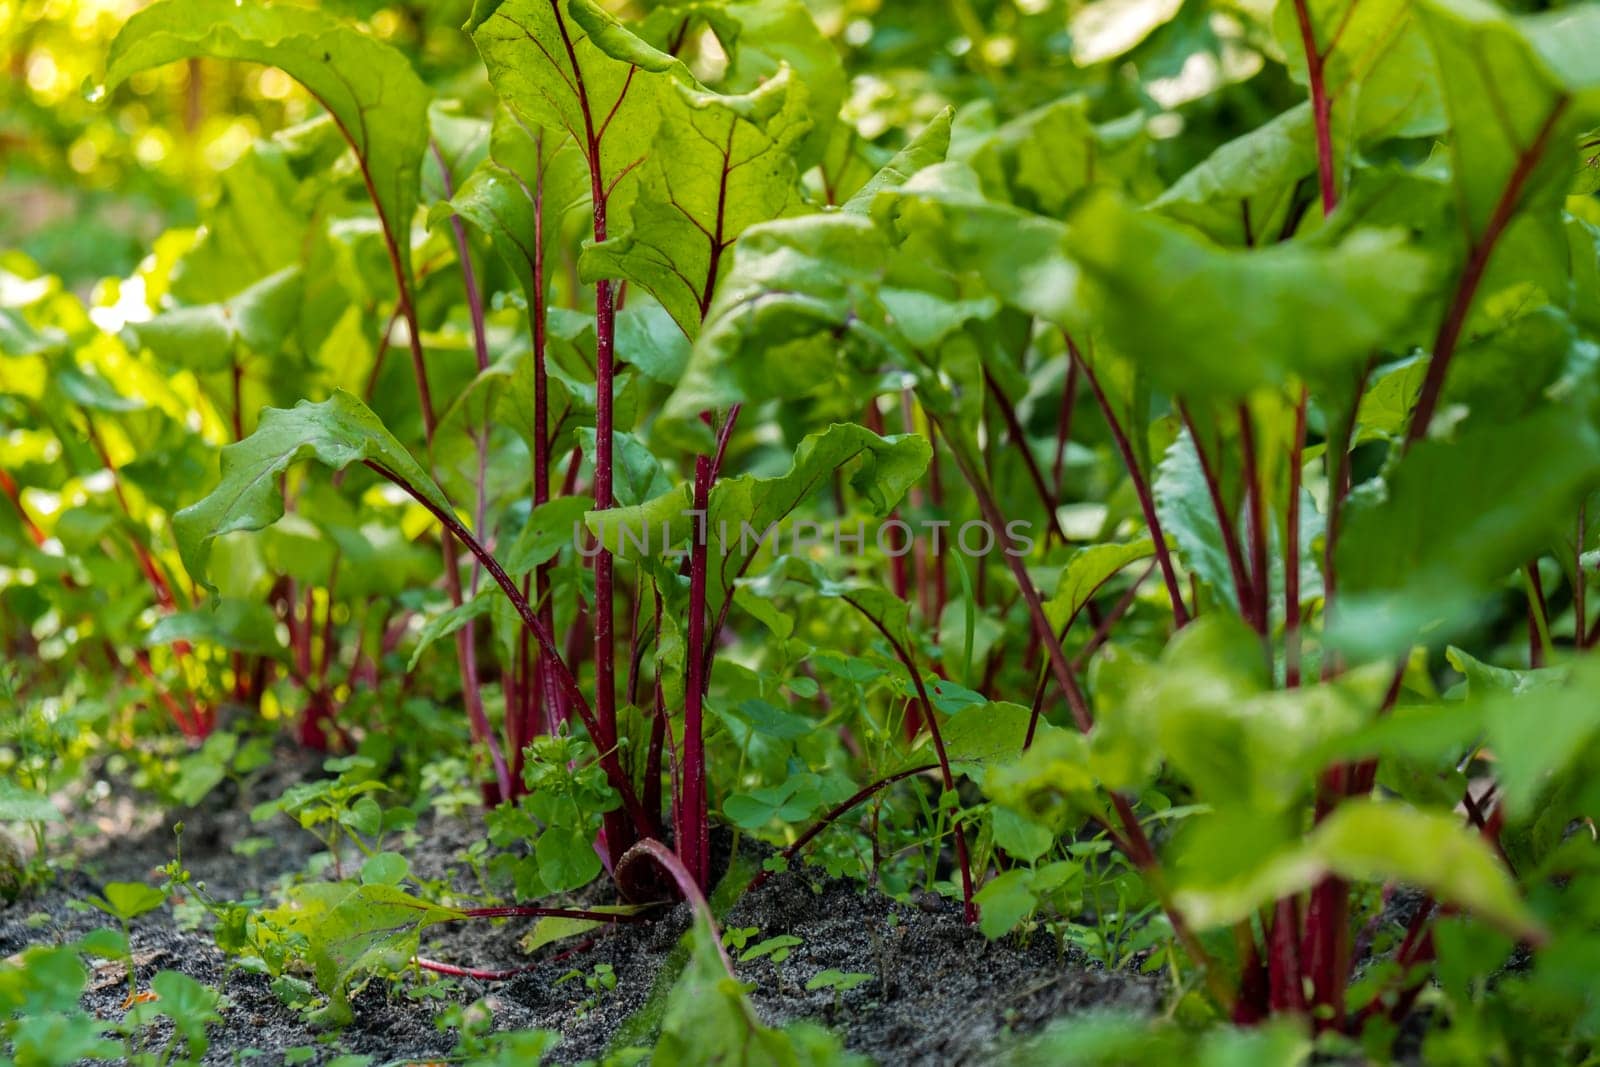 Close up of Red beet. Beetroot plant in the field. Concept of agriculture gardening in country side living. Veganism seasonal vegetable food production